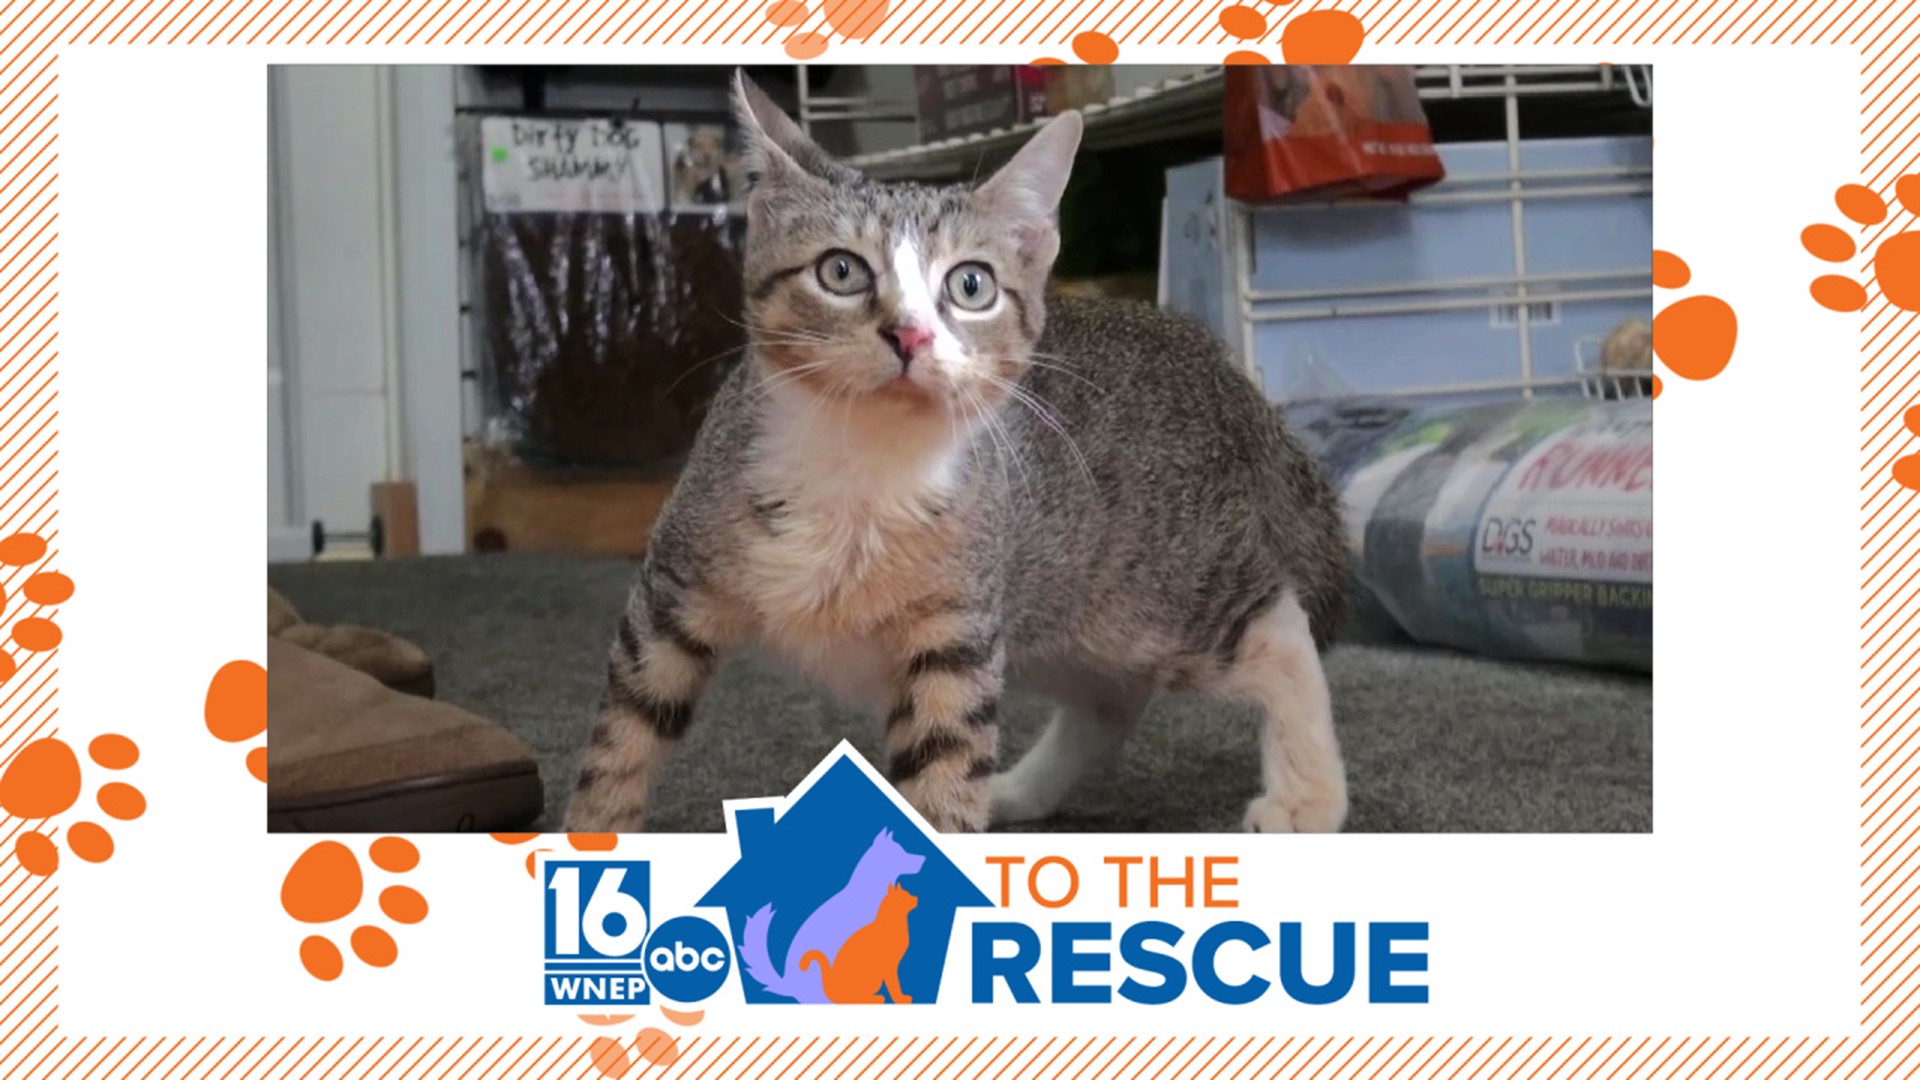 In this week's 16 To The Rescue, we meet a 4-month-old kitten who is scheduled to get a big surgery next week and needs help and a forever family and home.